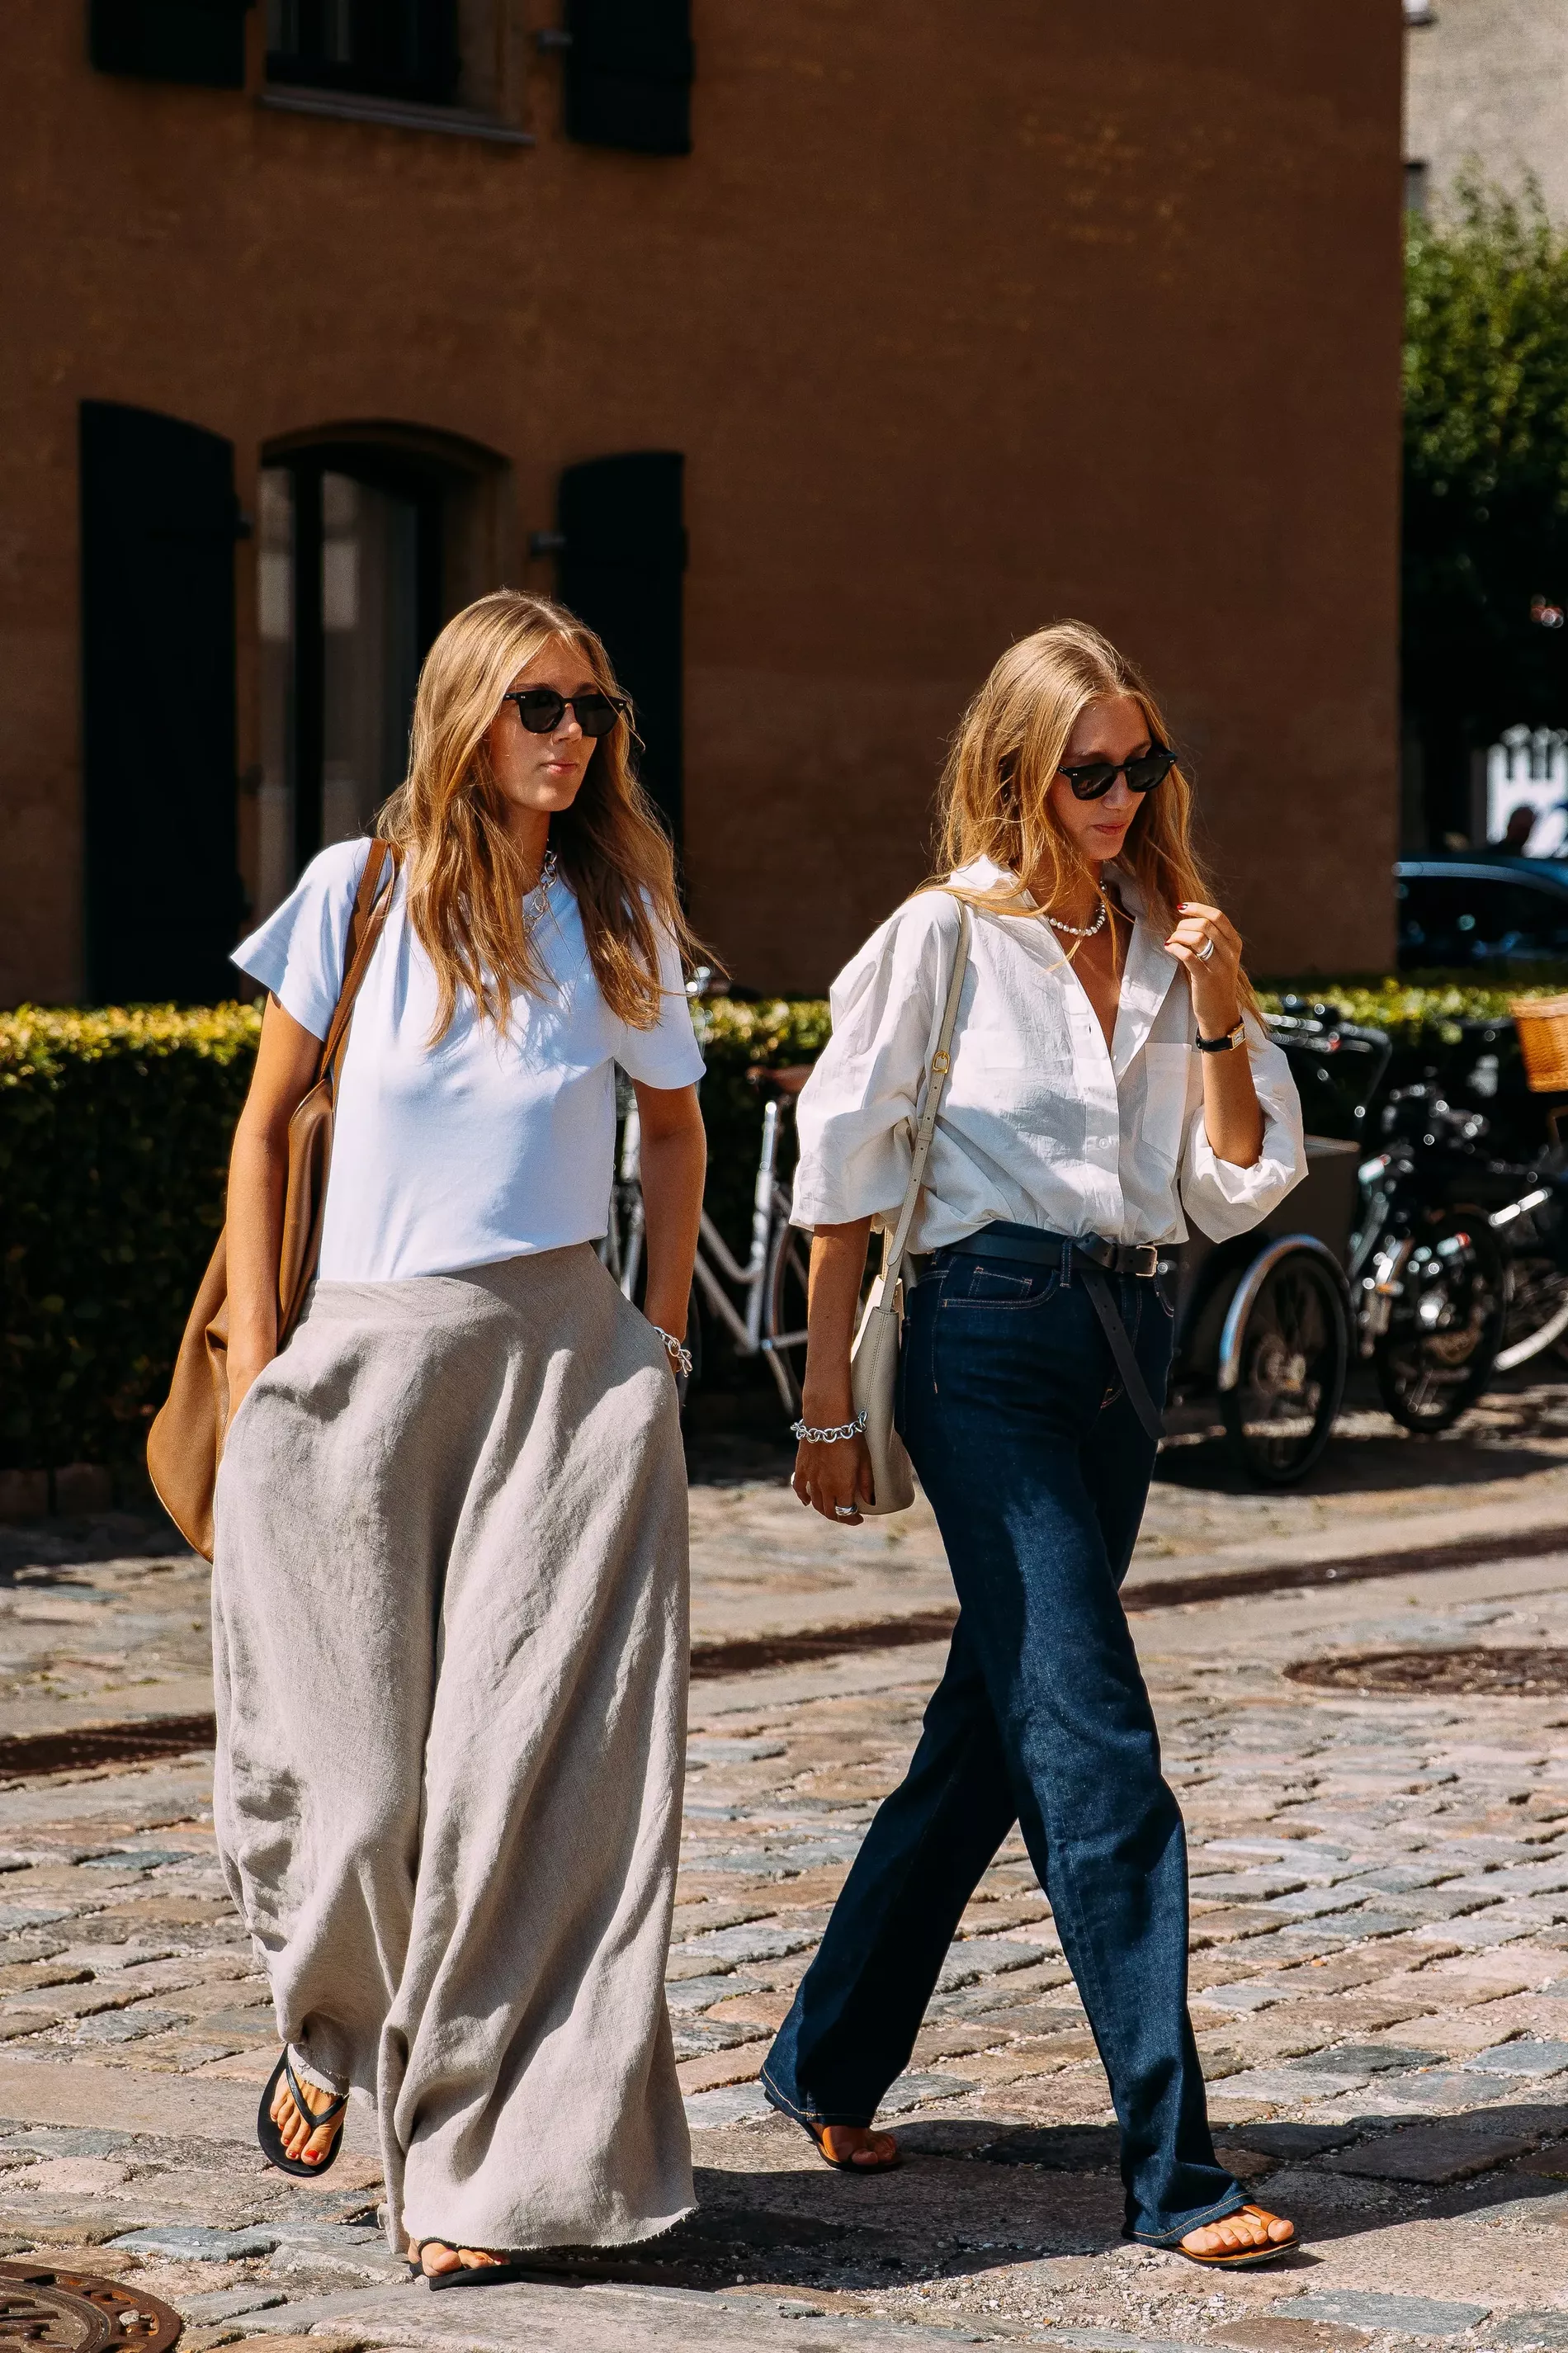 Copenhagen Fashion Week guests wear breezy white tops with jeans and beige pants 